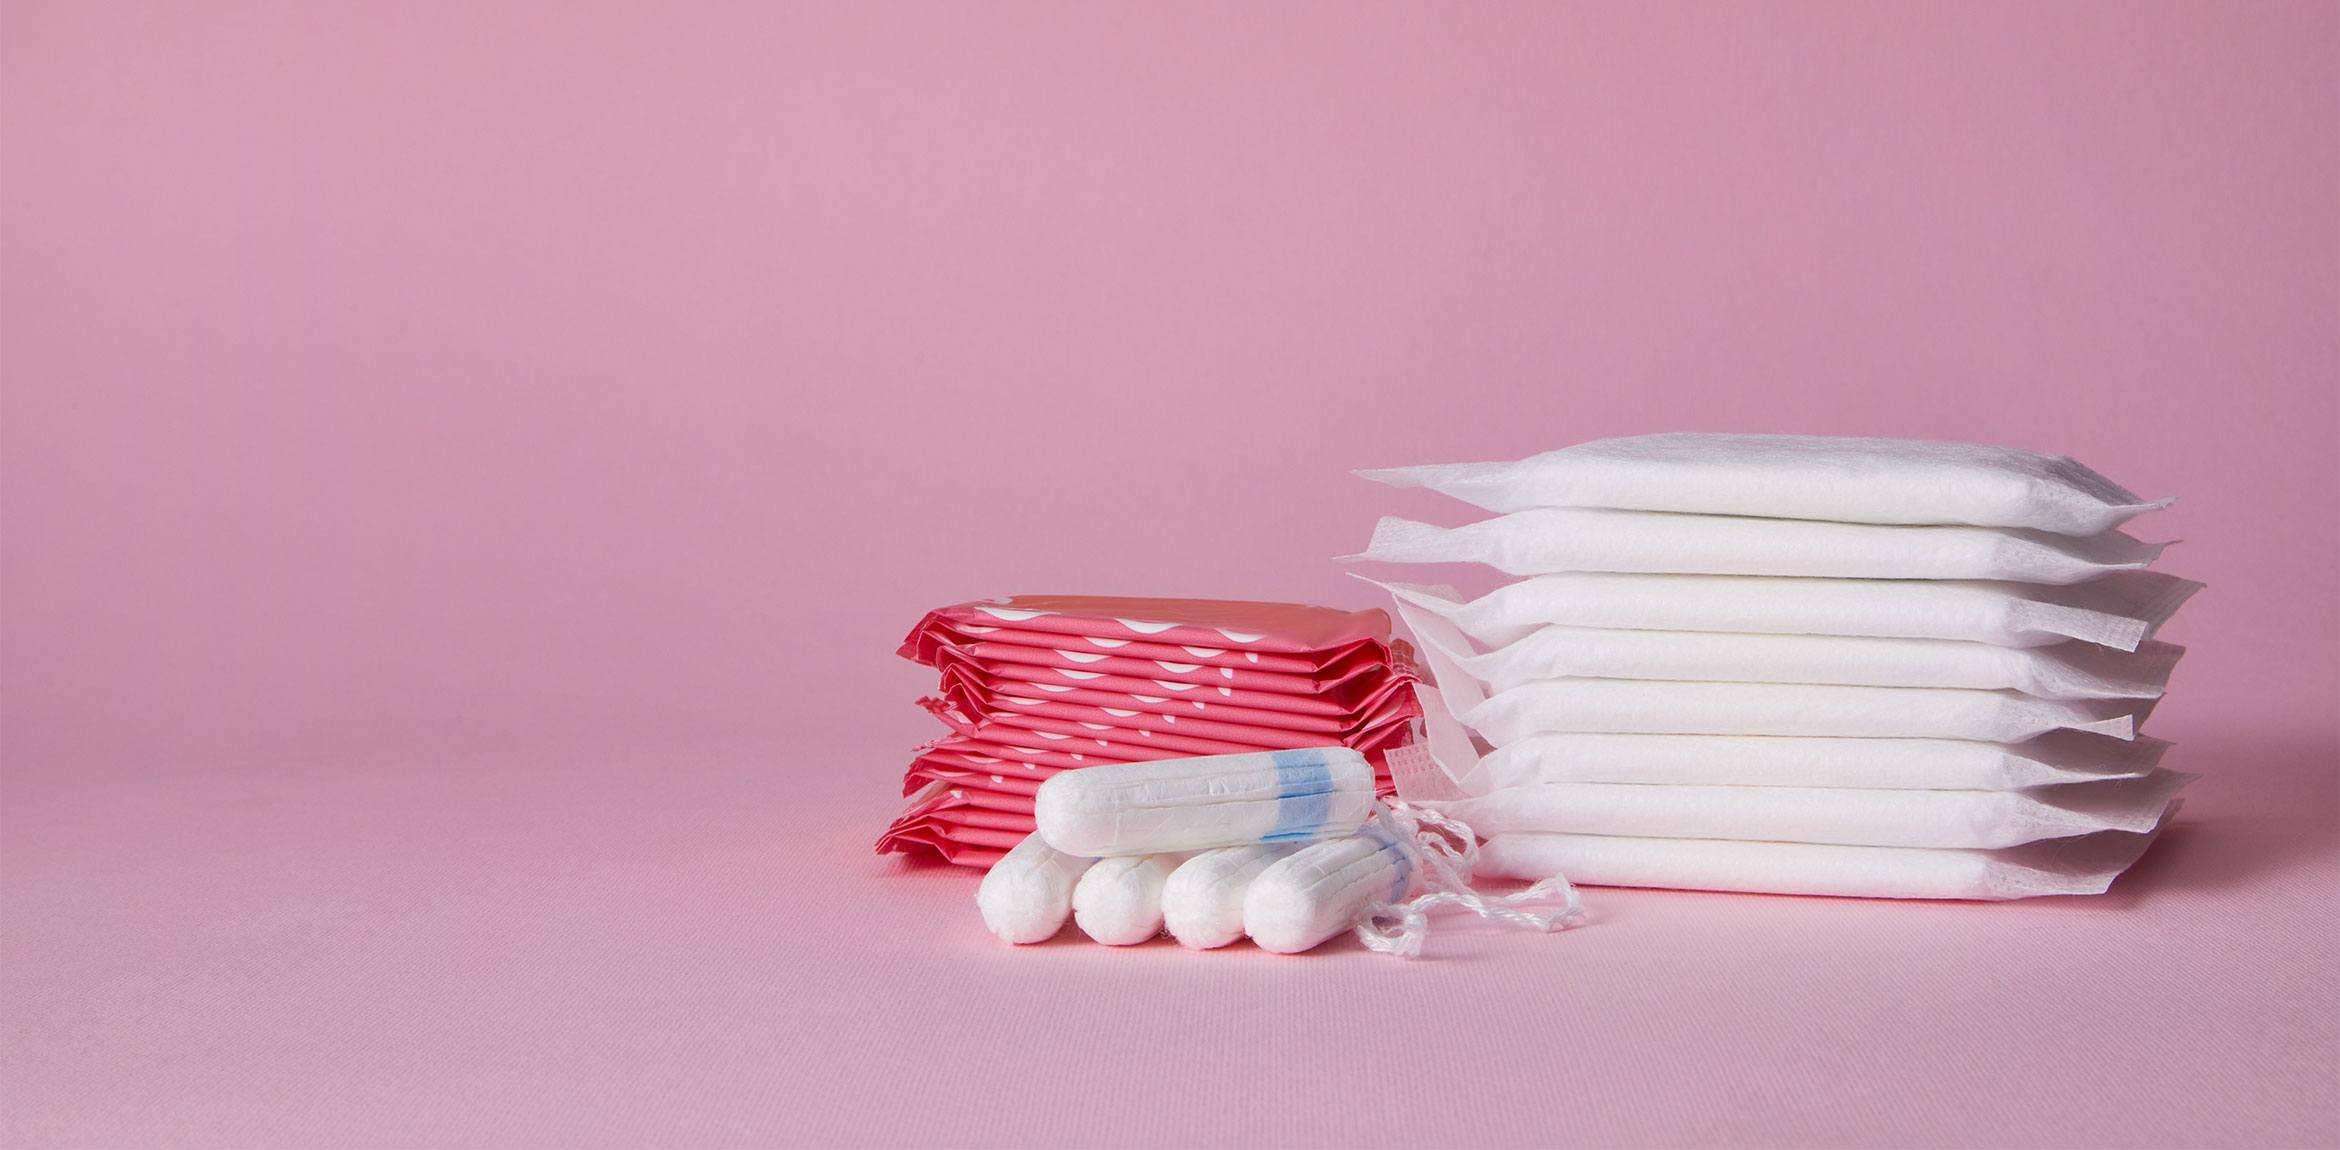 Stacks of menstrual pads and tampons on a pink background